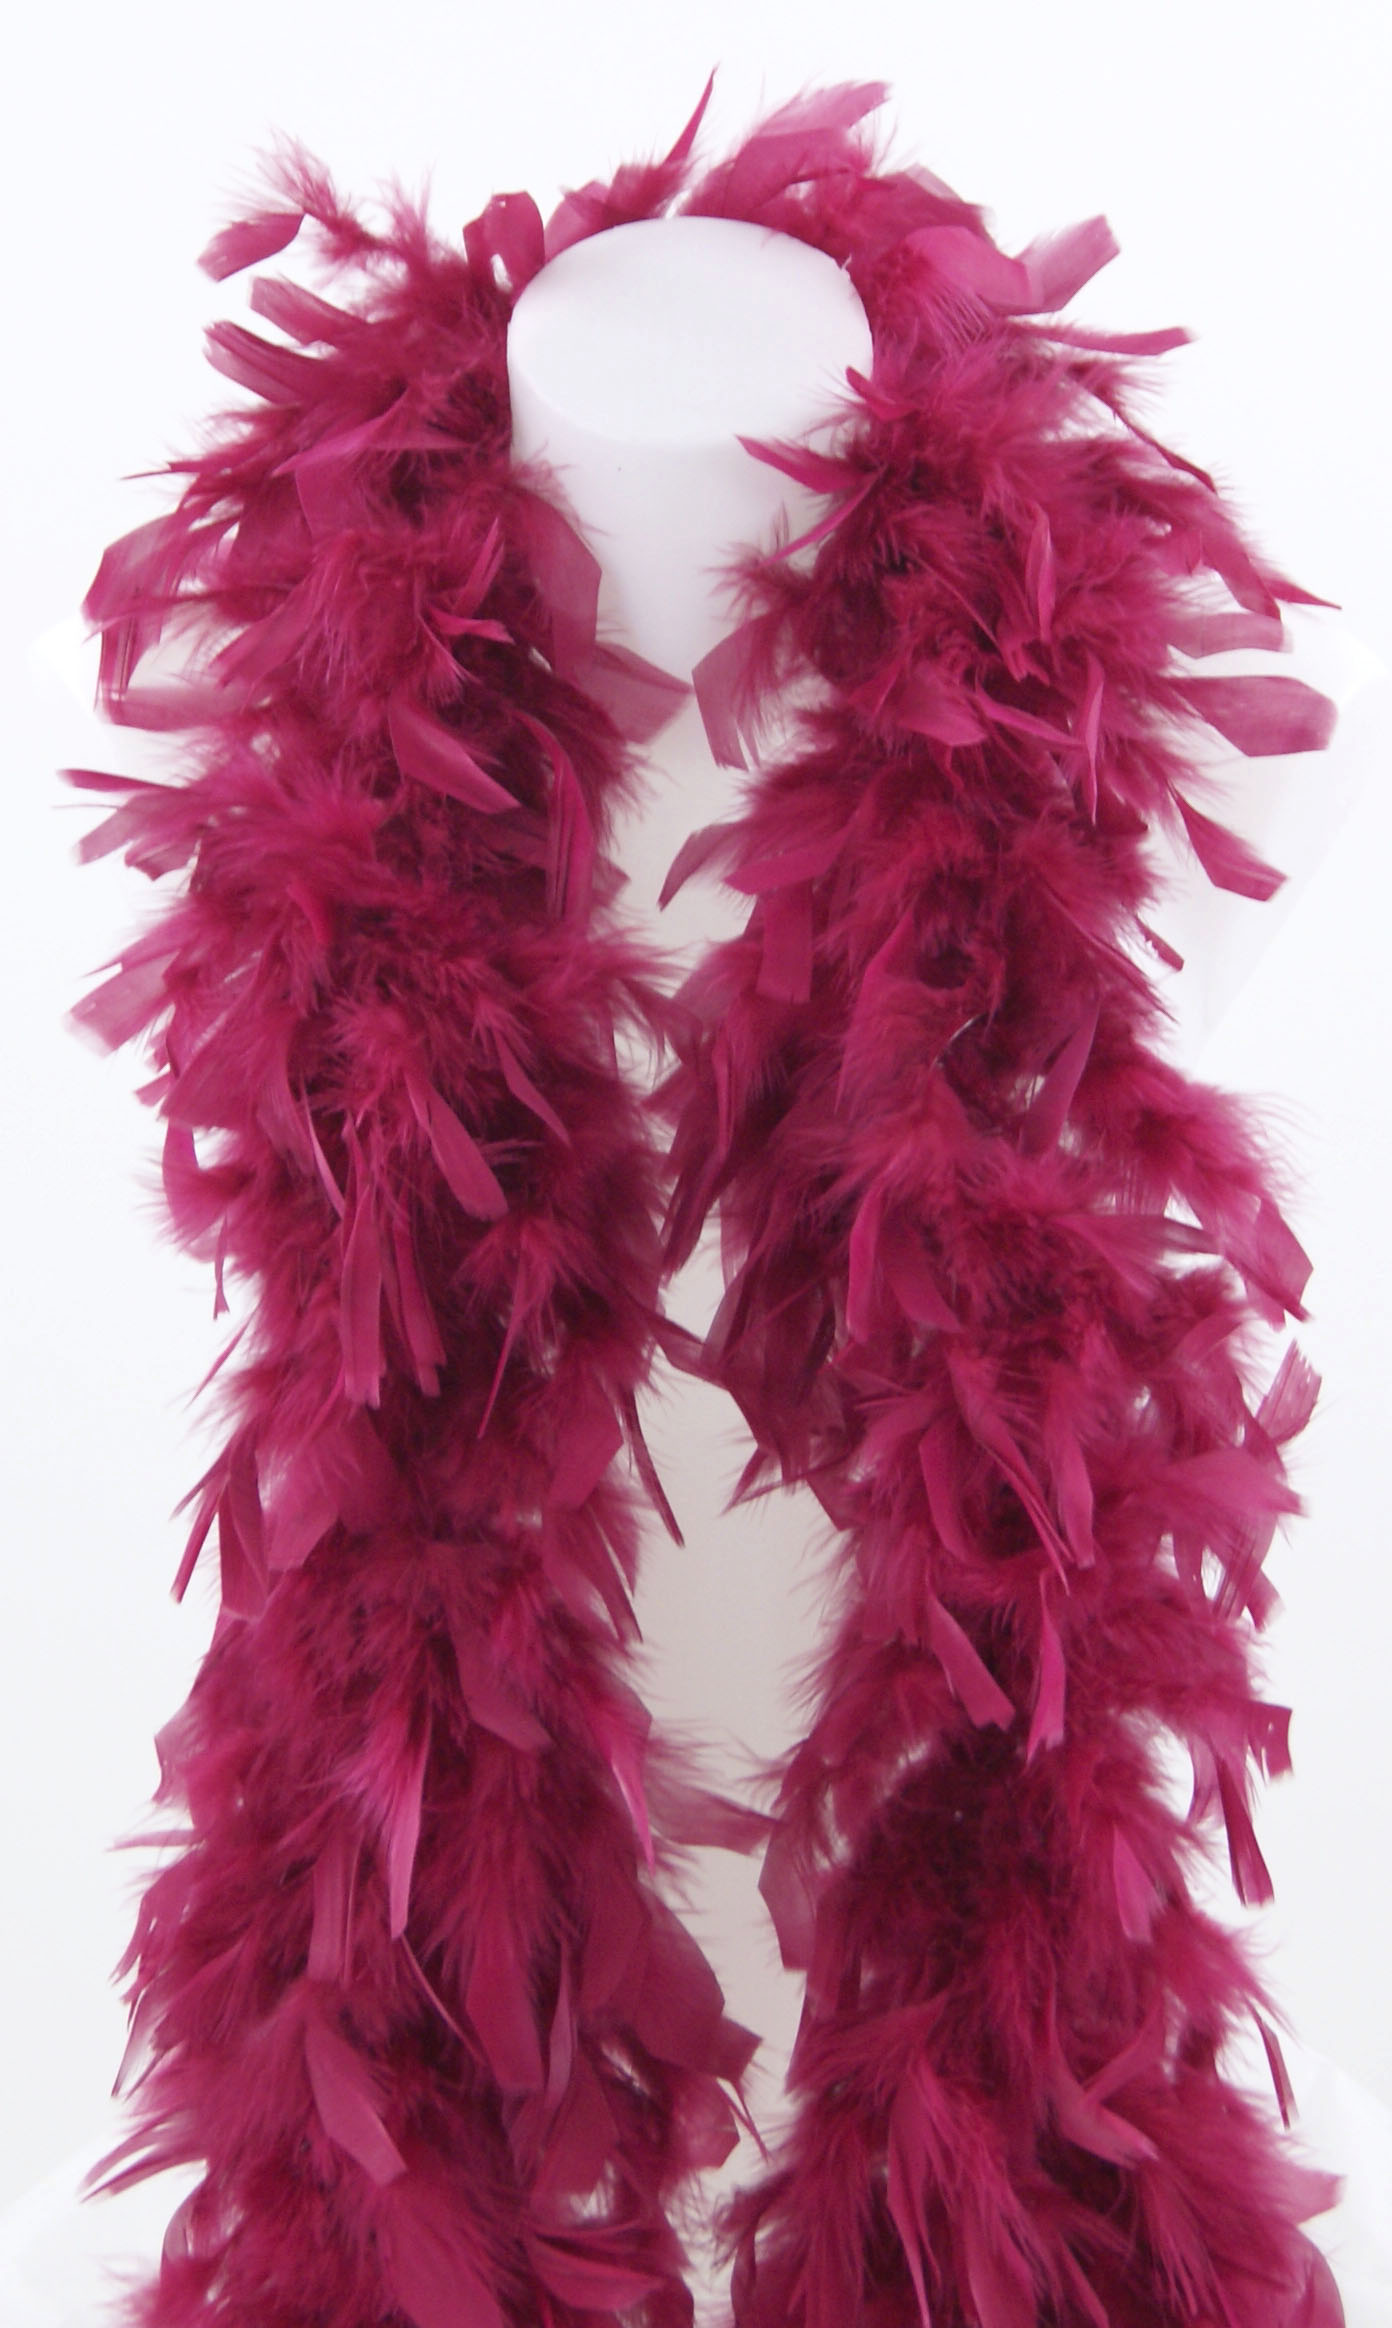 Boa plume dinde chandelle - 2 m - teintes rose - Plume Marcy